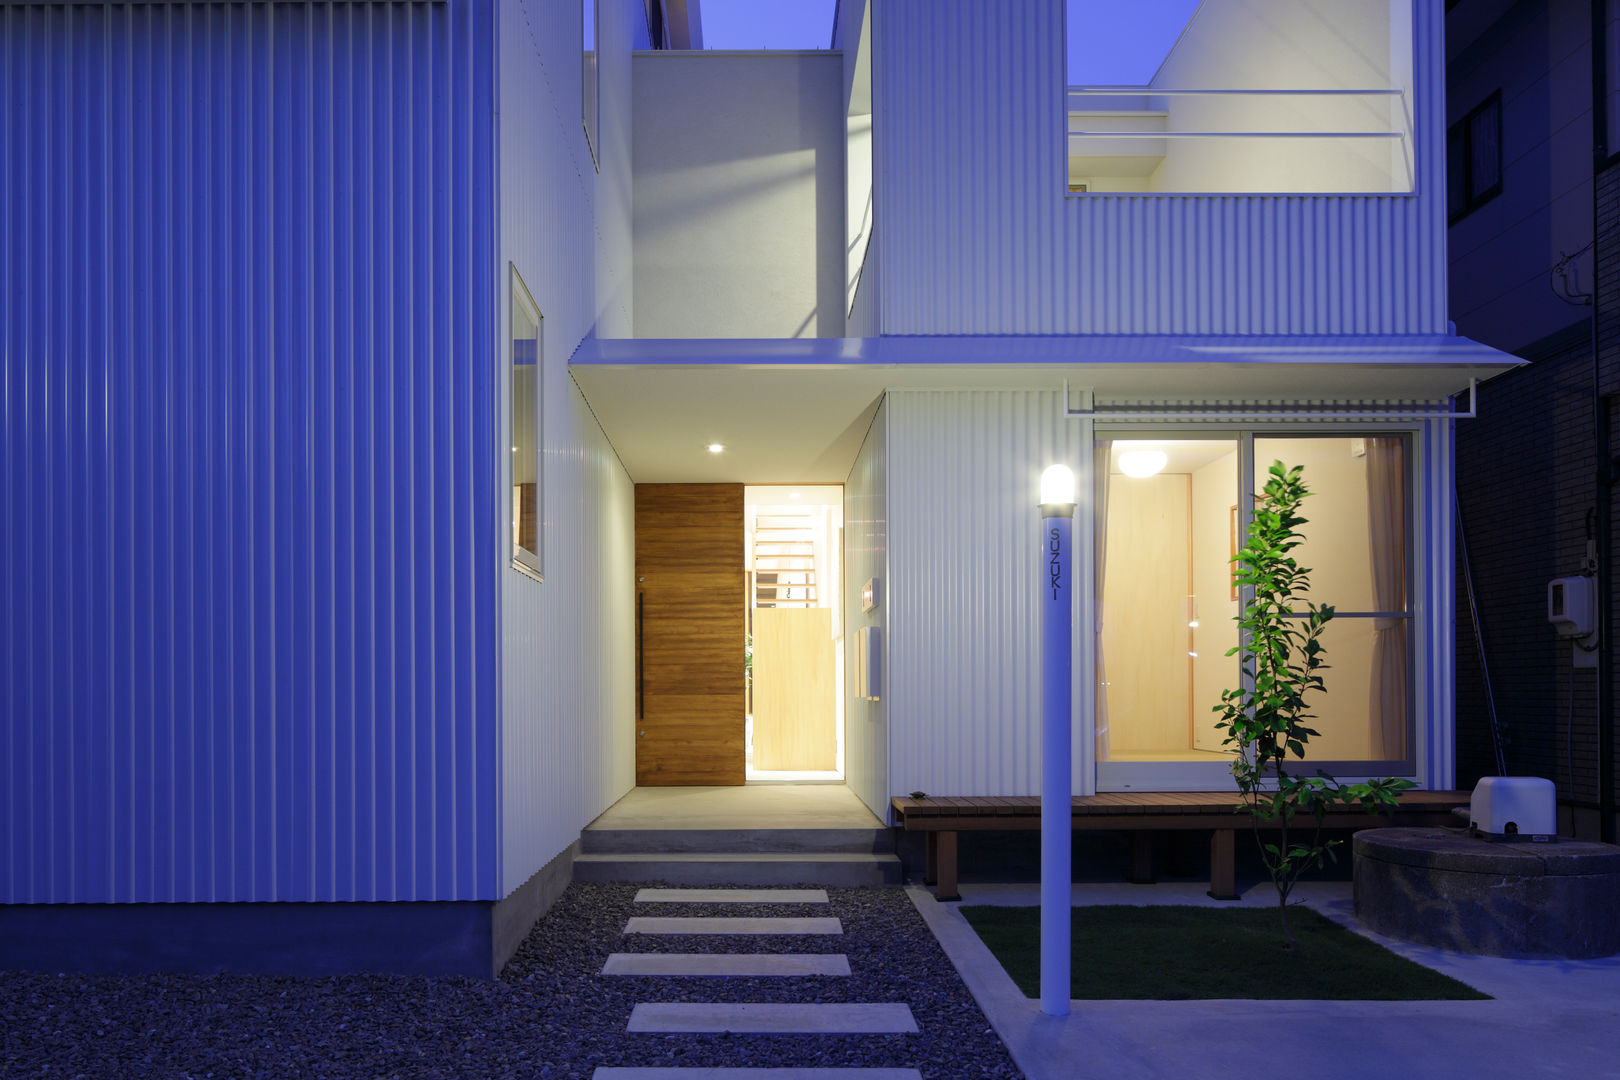 House in Gamagori, caico architect office caico architect office